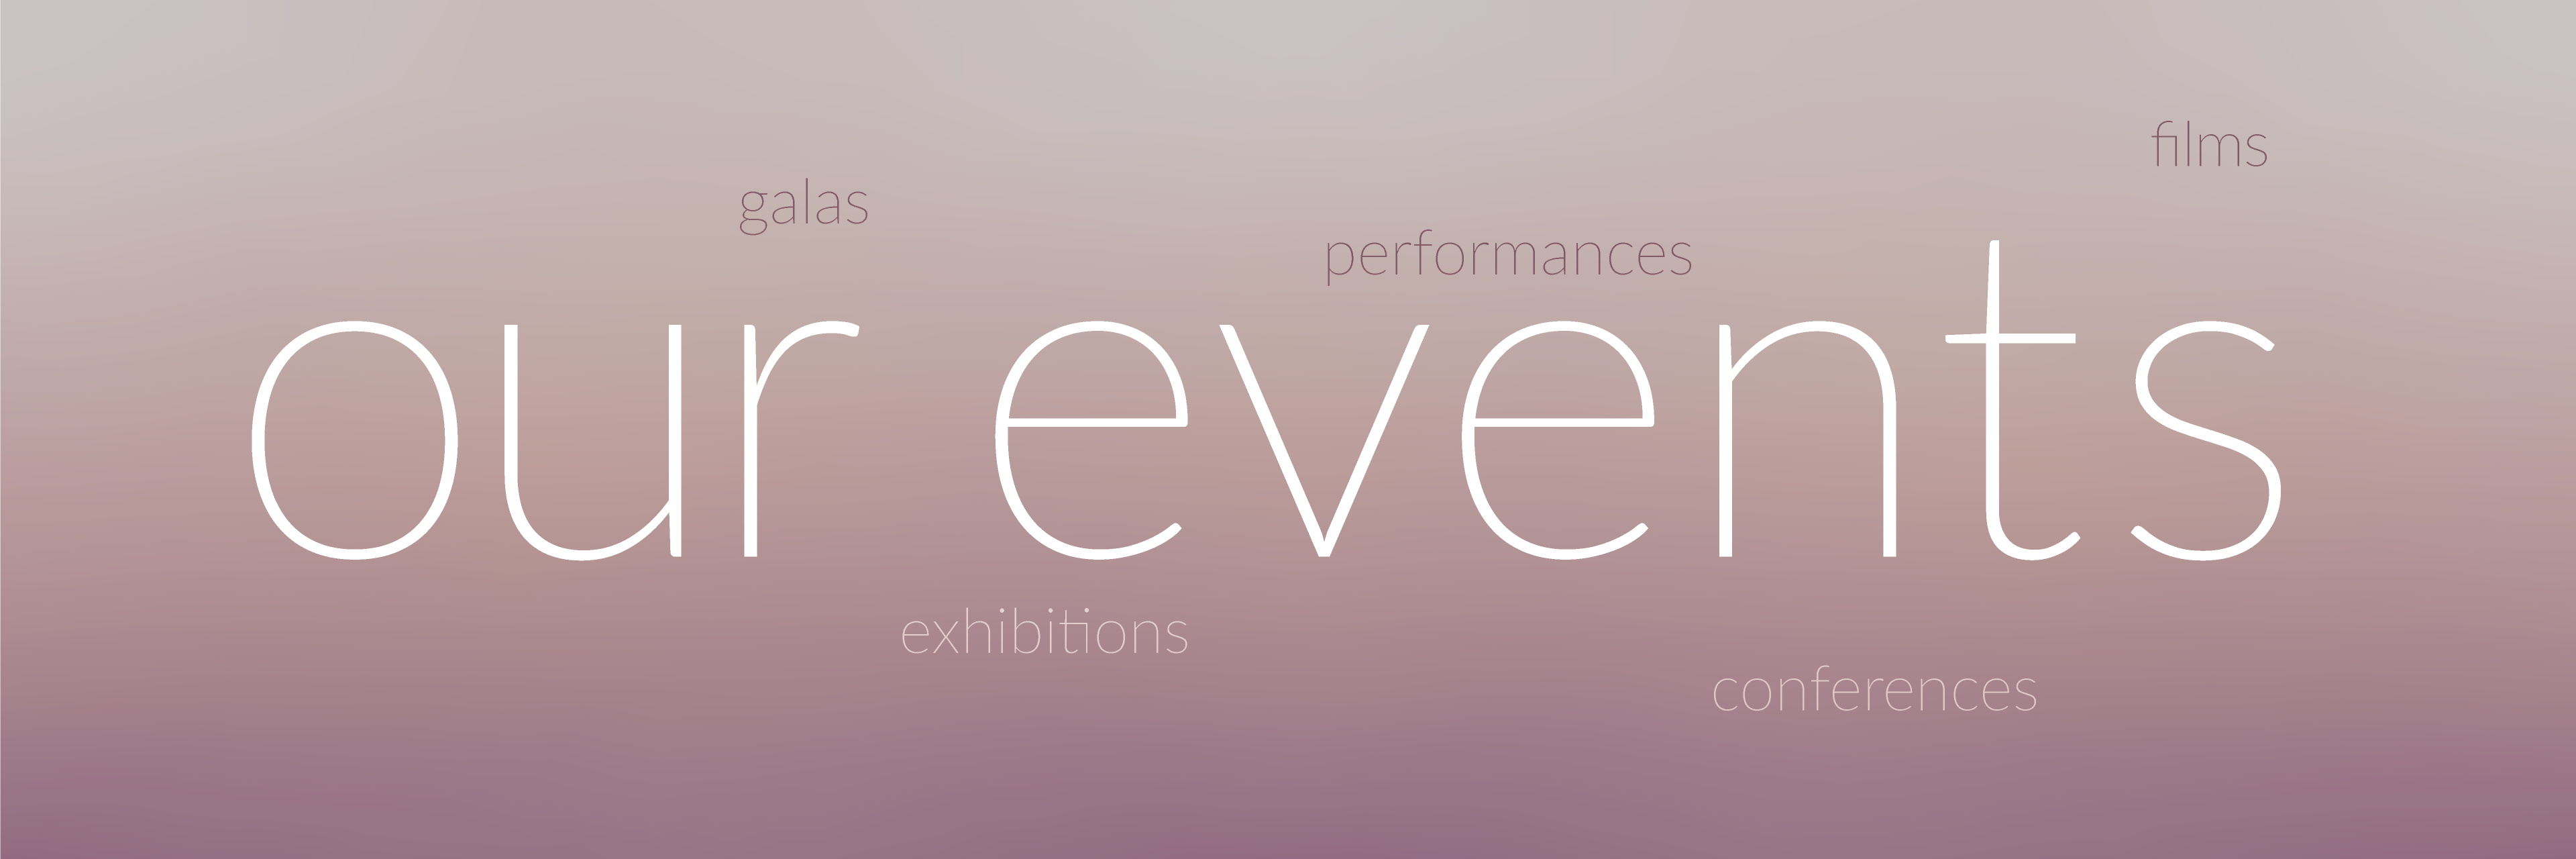 Subtle gradient from soft plum to a warm light grey with the word events in the middle.  Words representing types of events are sitting in the back ground.